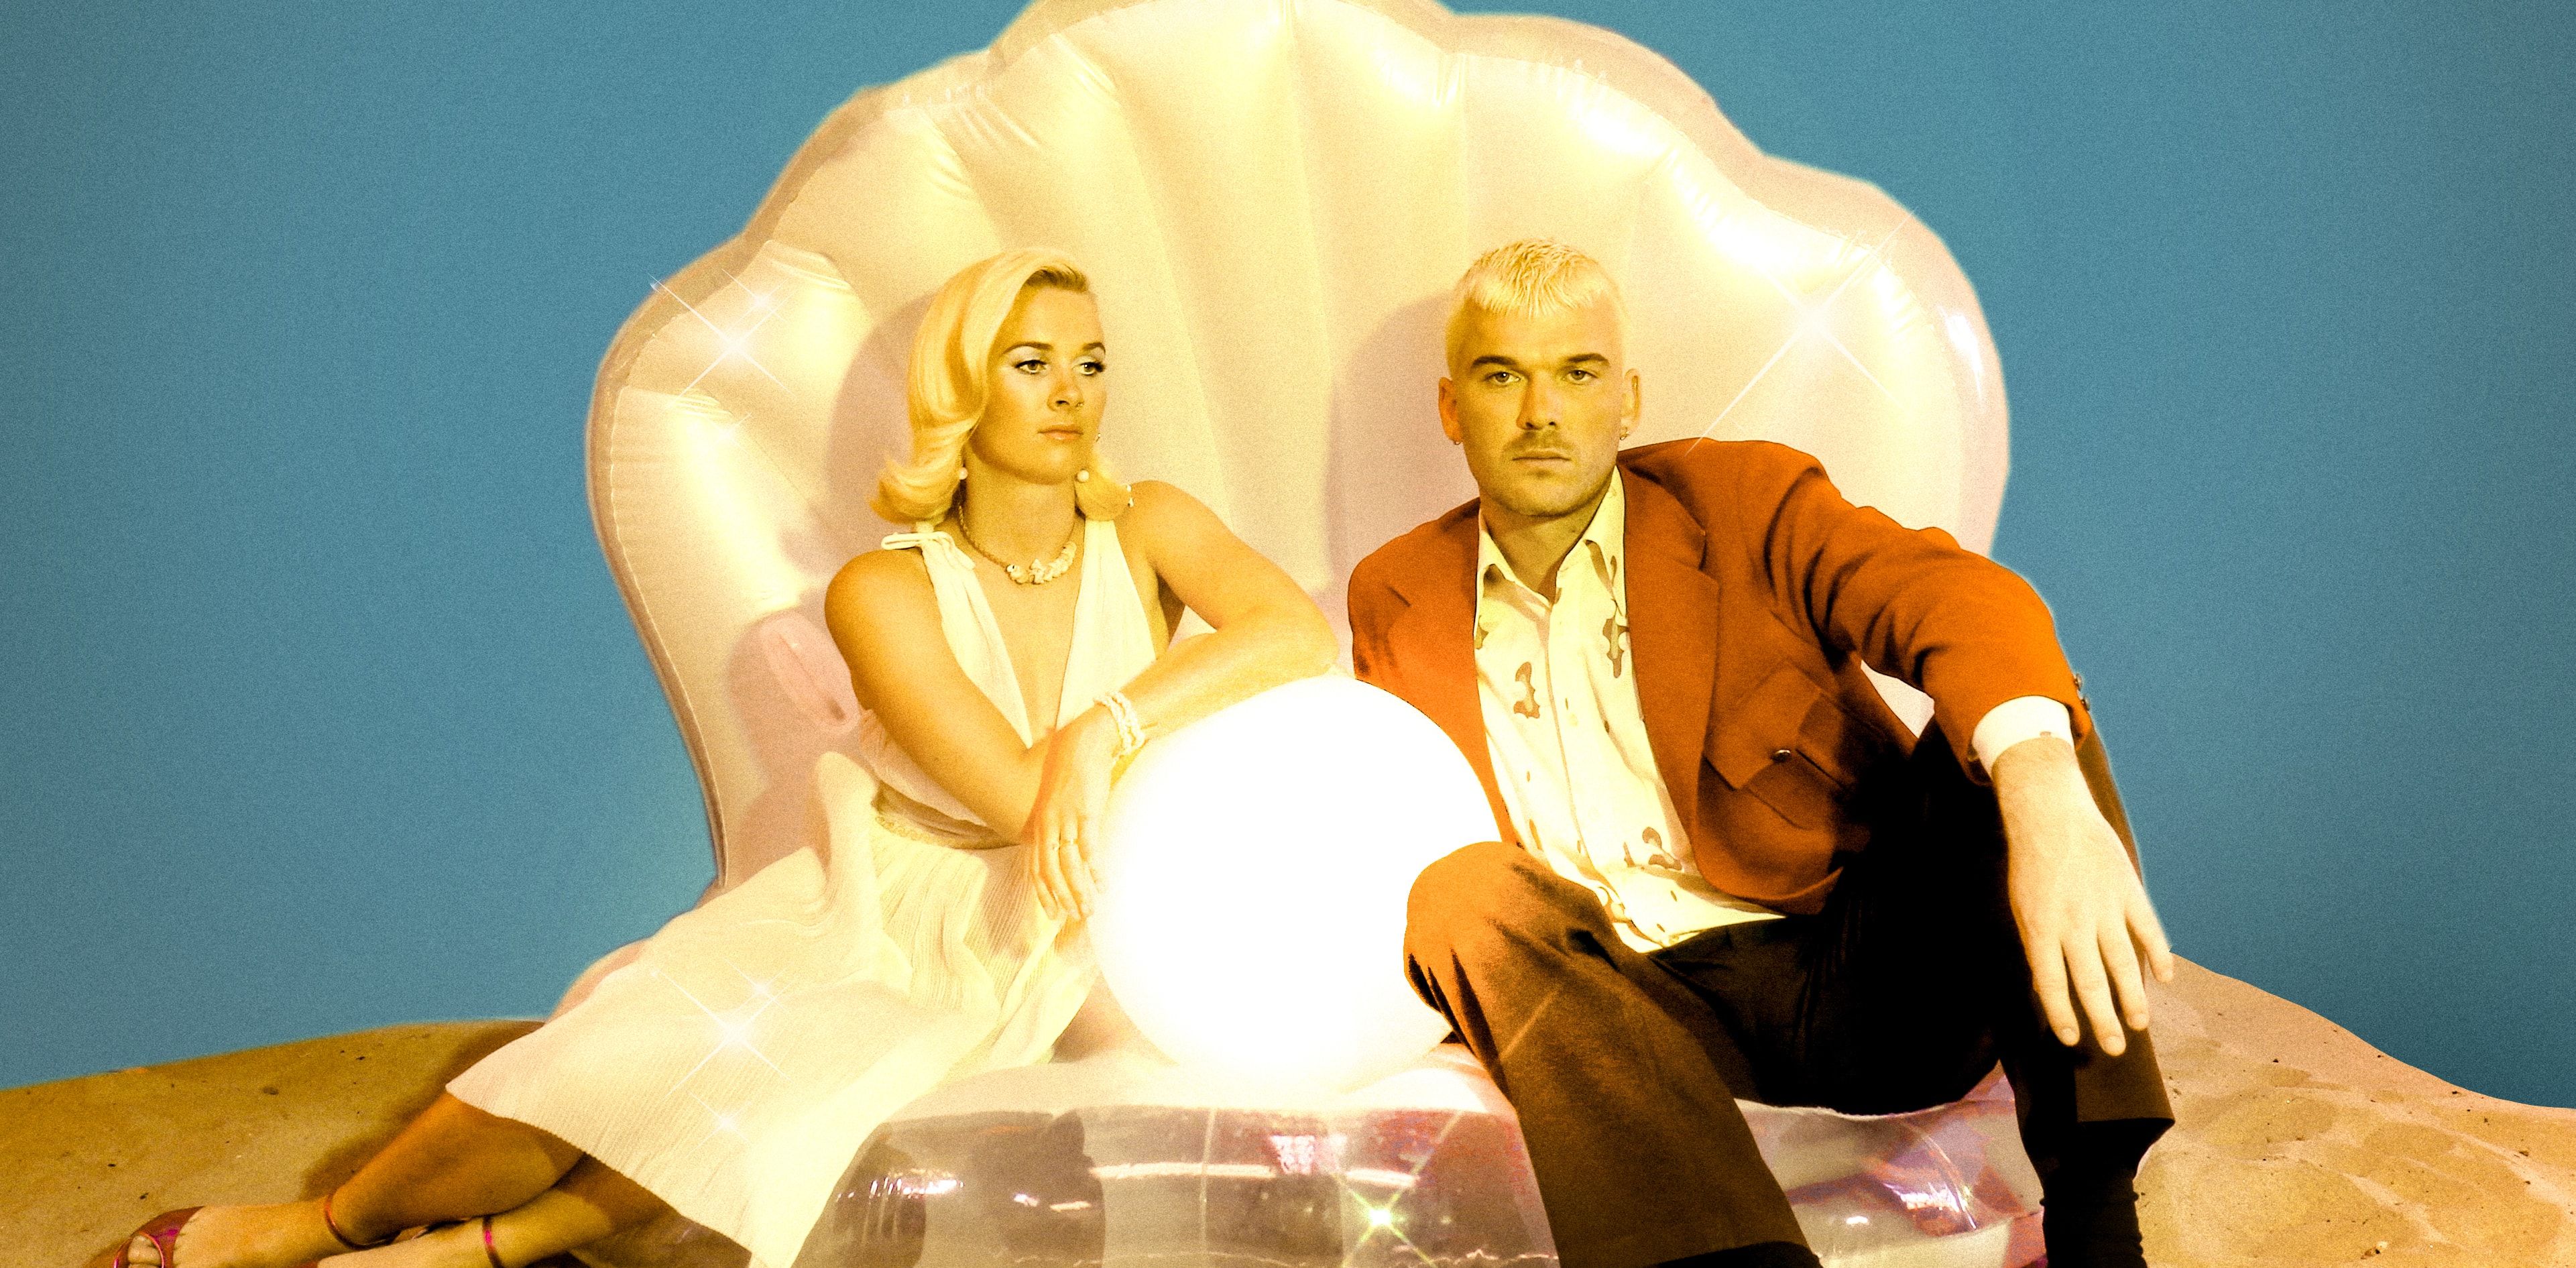 Broods escapes industry-regulated pop standards on ‘Don’t Feed the Pop Monster’